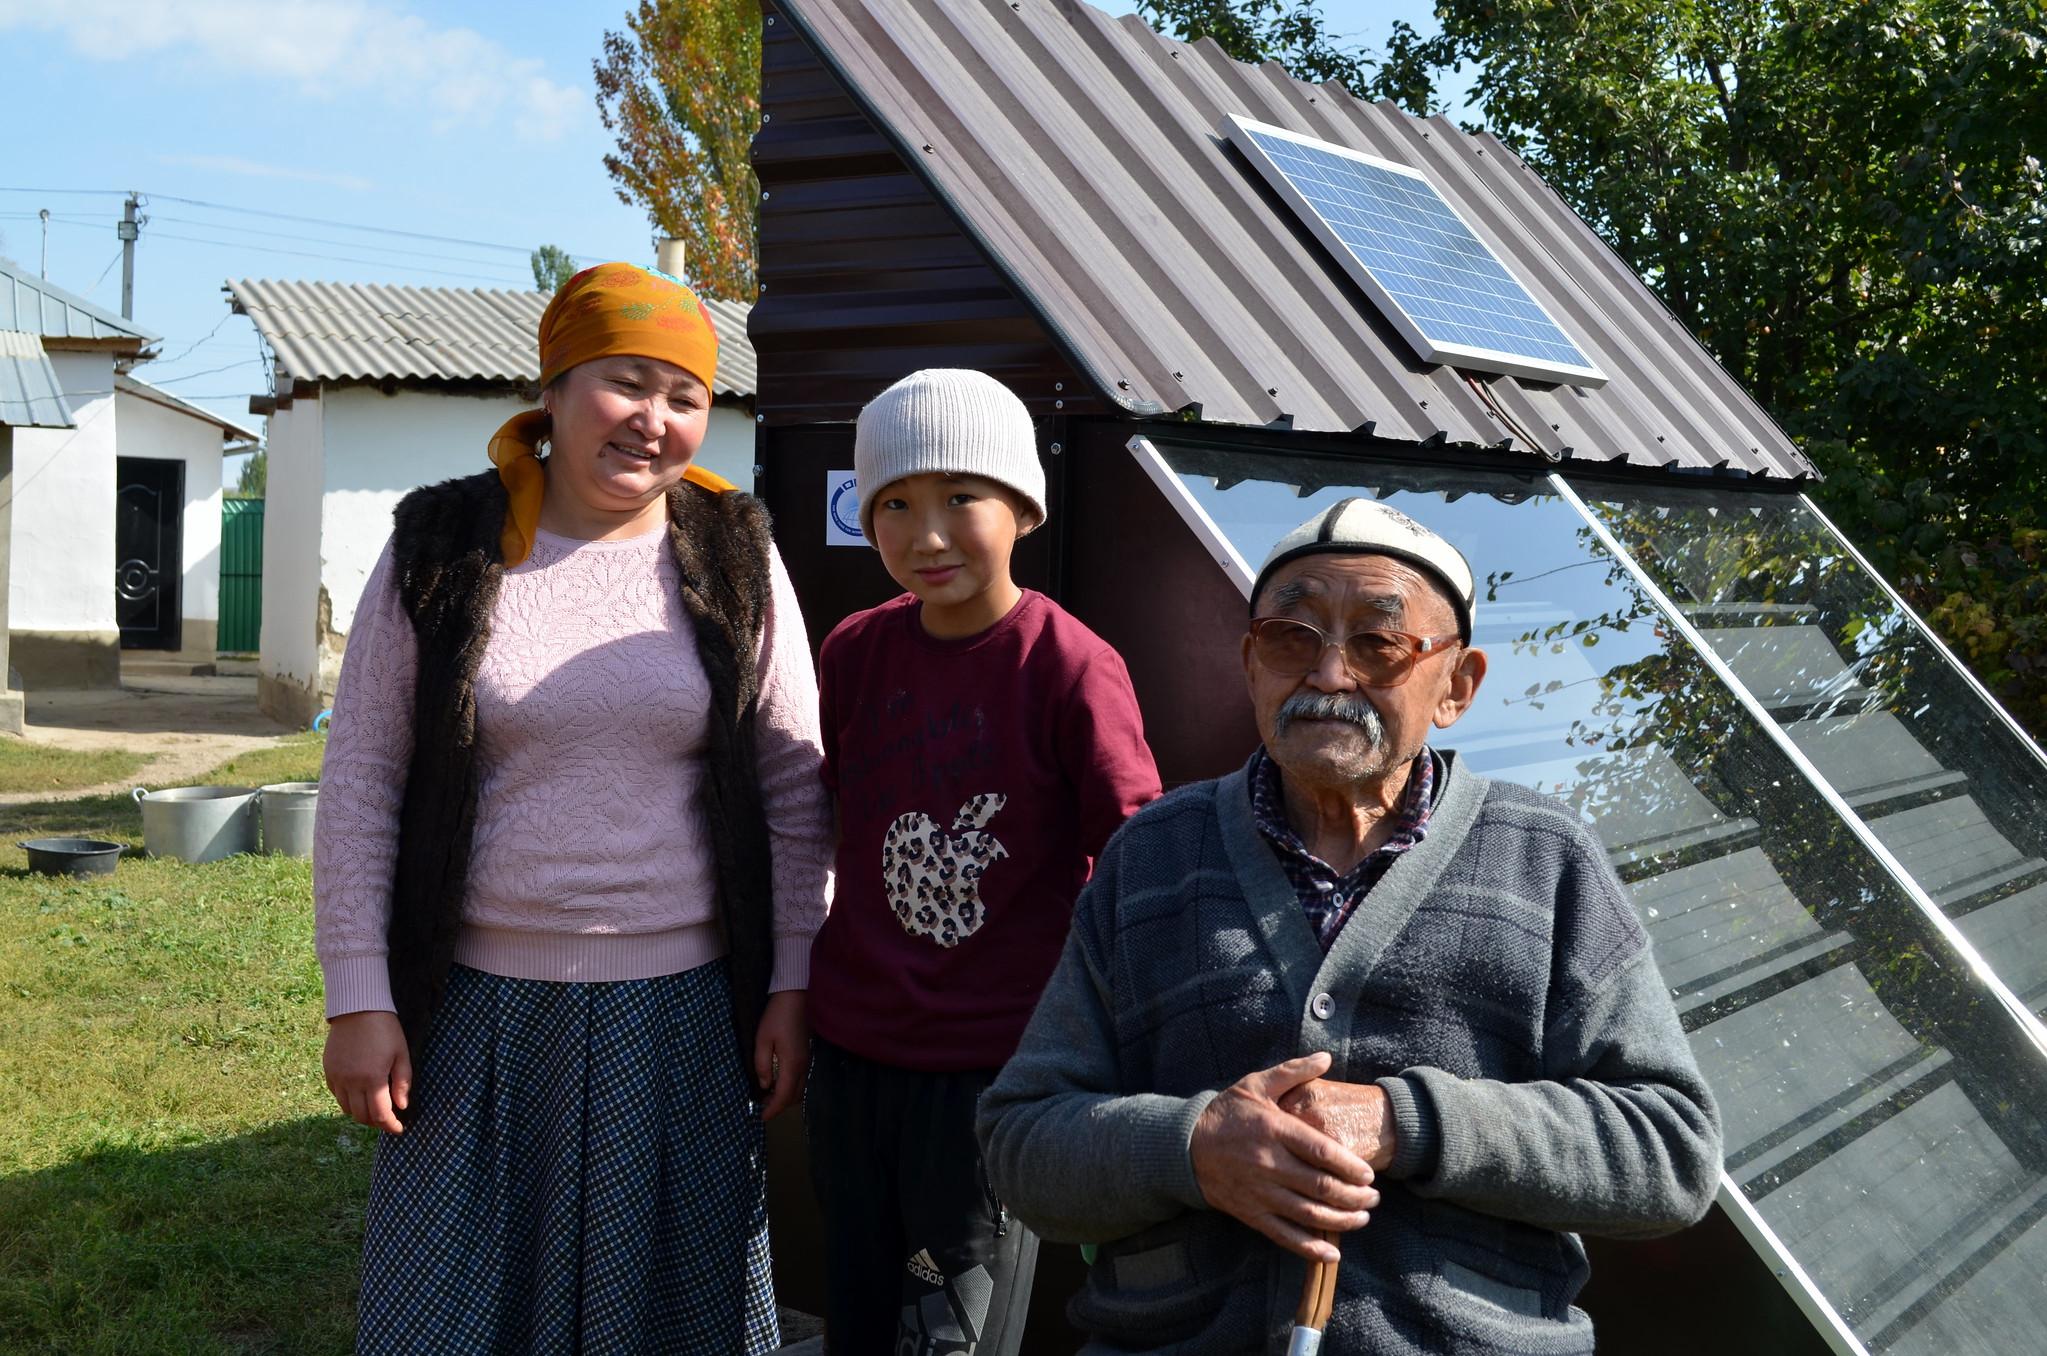 Together with partners, UNDP is working to increase access to renewable energy in rural areas of Kyrgyzstan